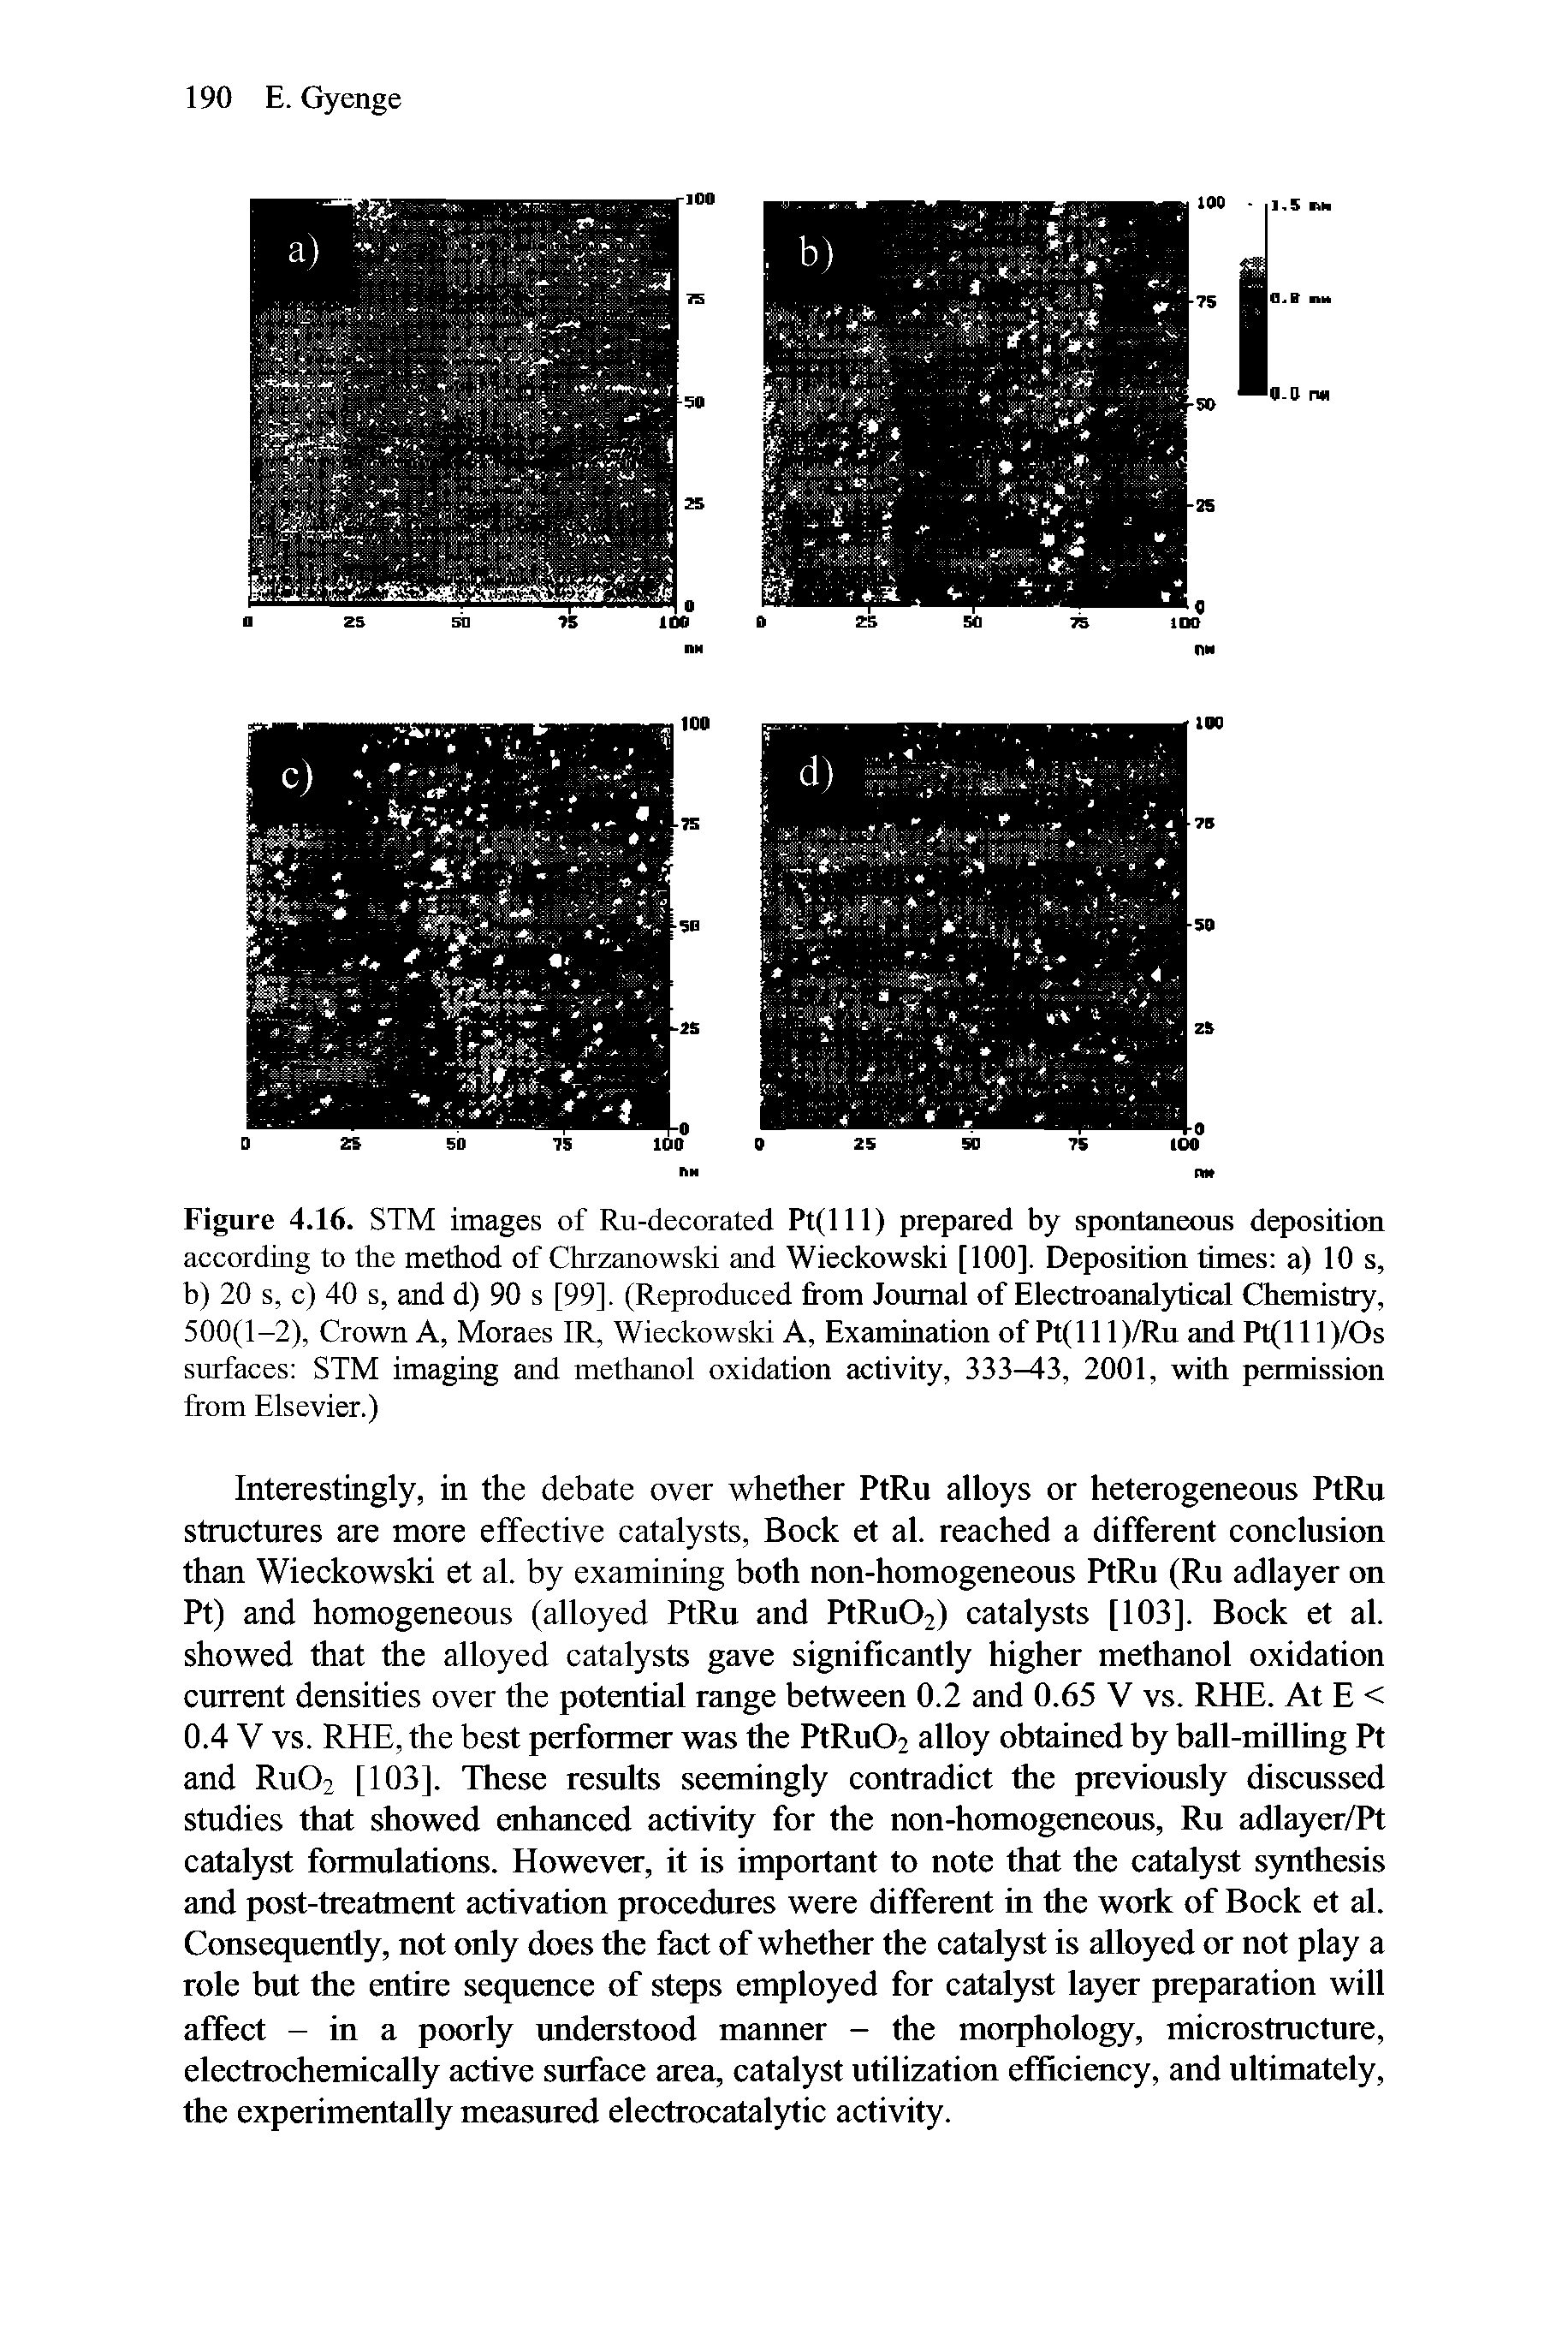 Figure 4.16. STM images of Ru-decorated Pt(lll) prepared by spontaneous deposition according to the method of Chrzanowski and Wieckowski [100]. Deposition times a) 10 s, b) 20 s, c) 40 s, and d) 90 s [99]. (Reproduced from Journal of Electroanalytical Chemistry, 500(1-2), Crown A, Moraes IR, Wieckowski A, Examination of Pt(l 11)/Ru and Pt(l 1 l)/Os surfaces STM imaging and methanol oxidation activity, 333 3, 2001, with permission from Elsevier.)...